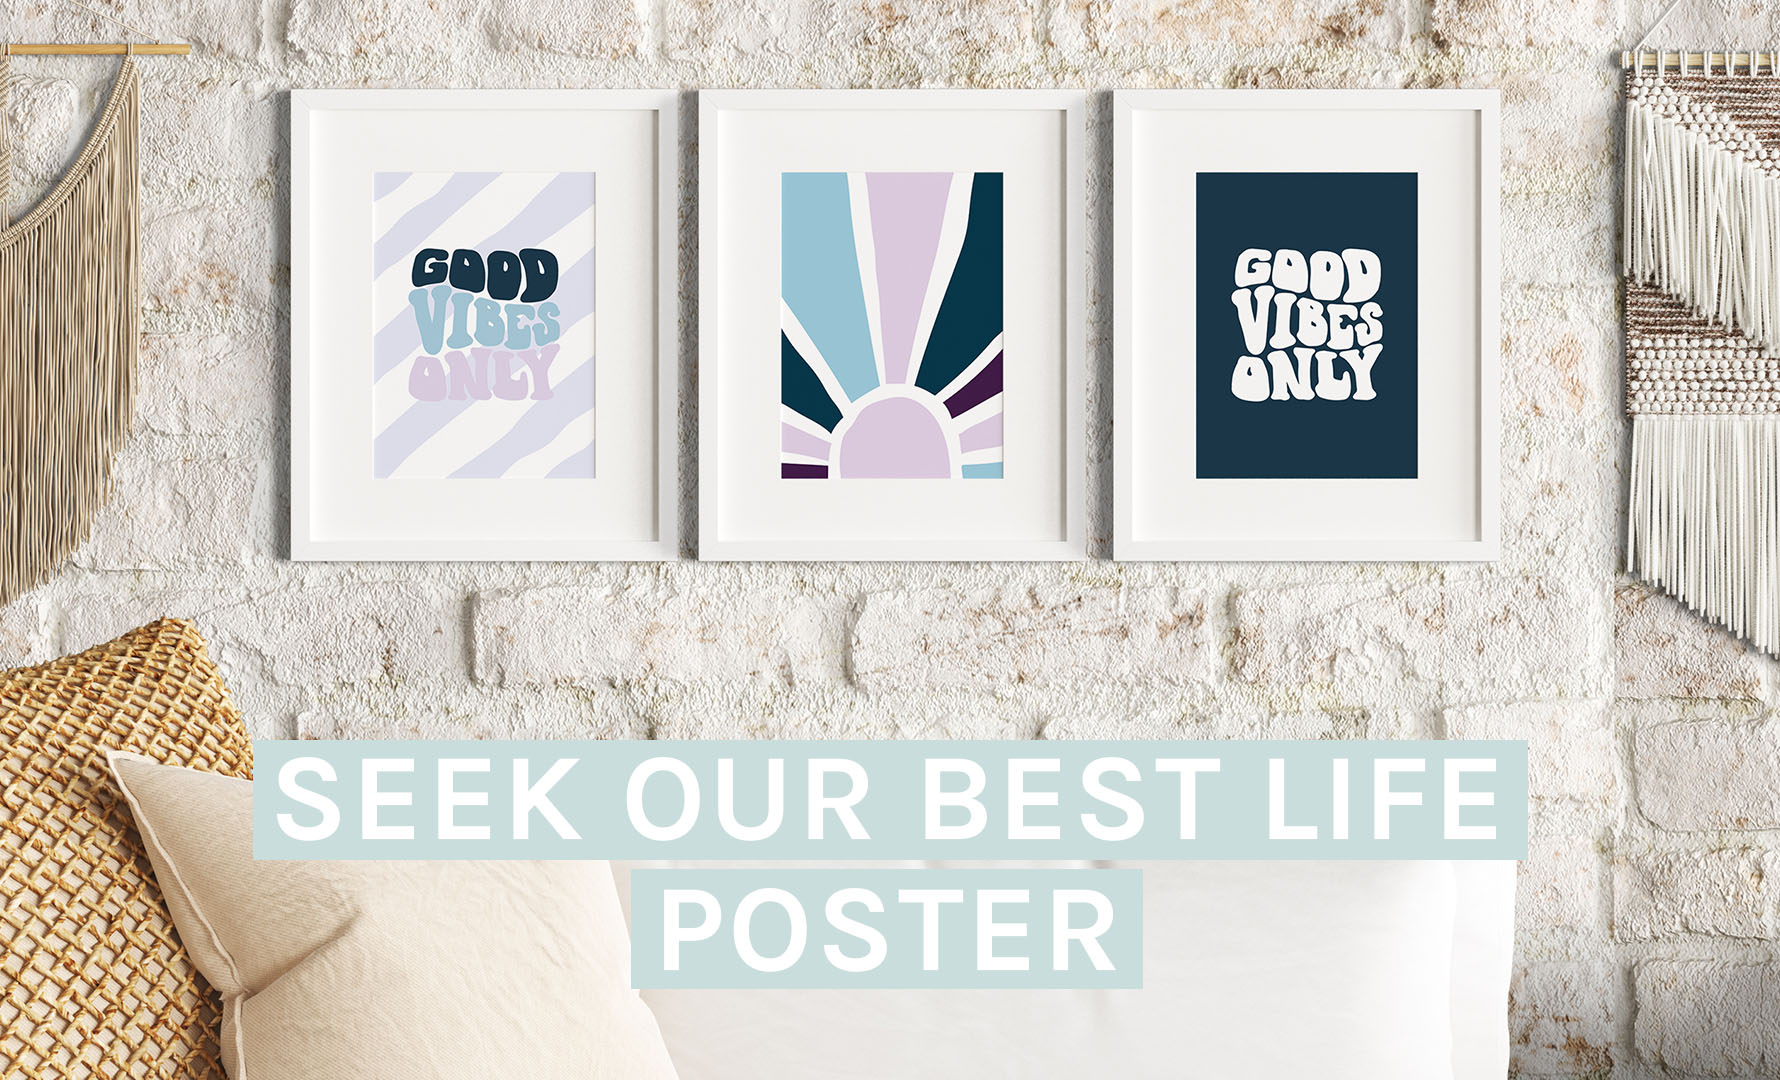 Free Poster zur Seek Our Best Life Edition